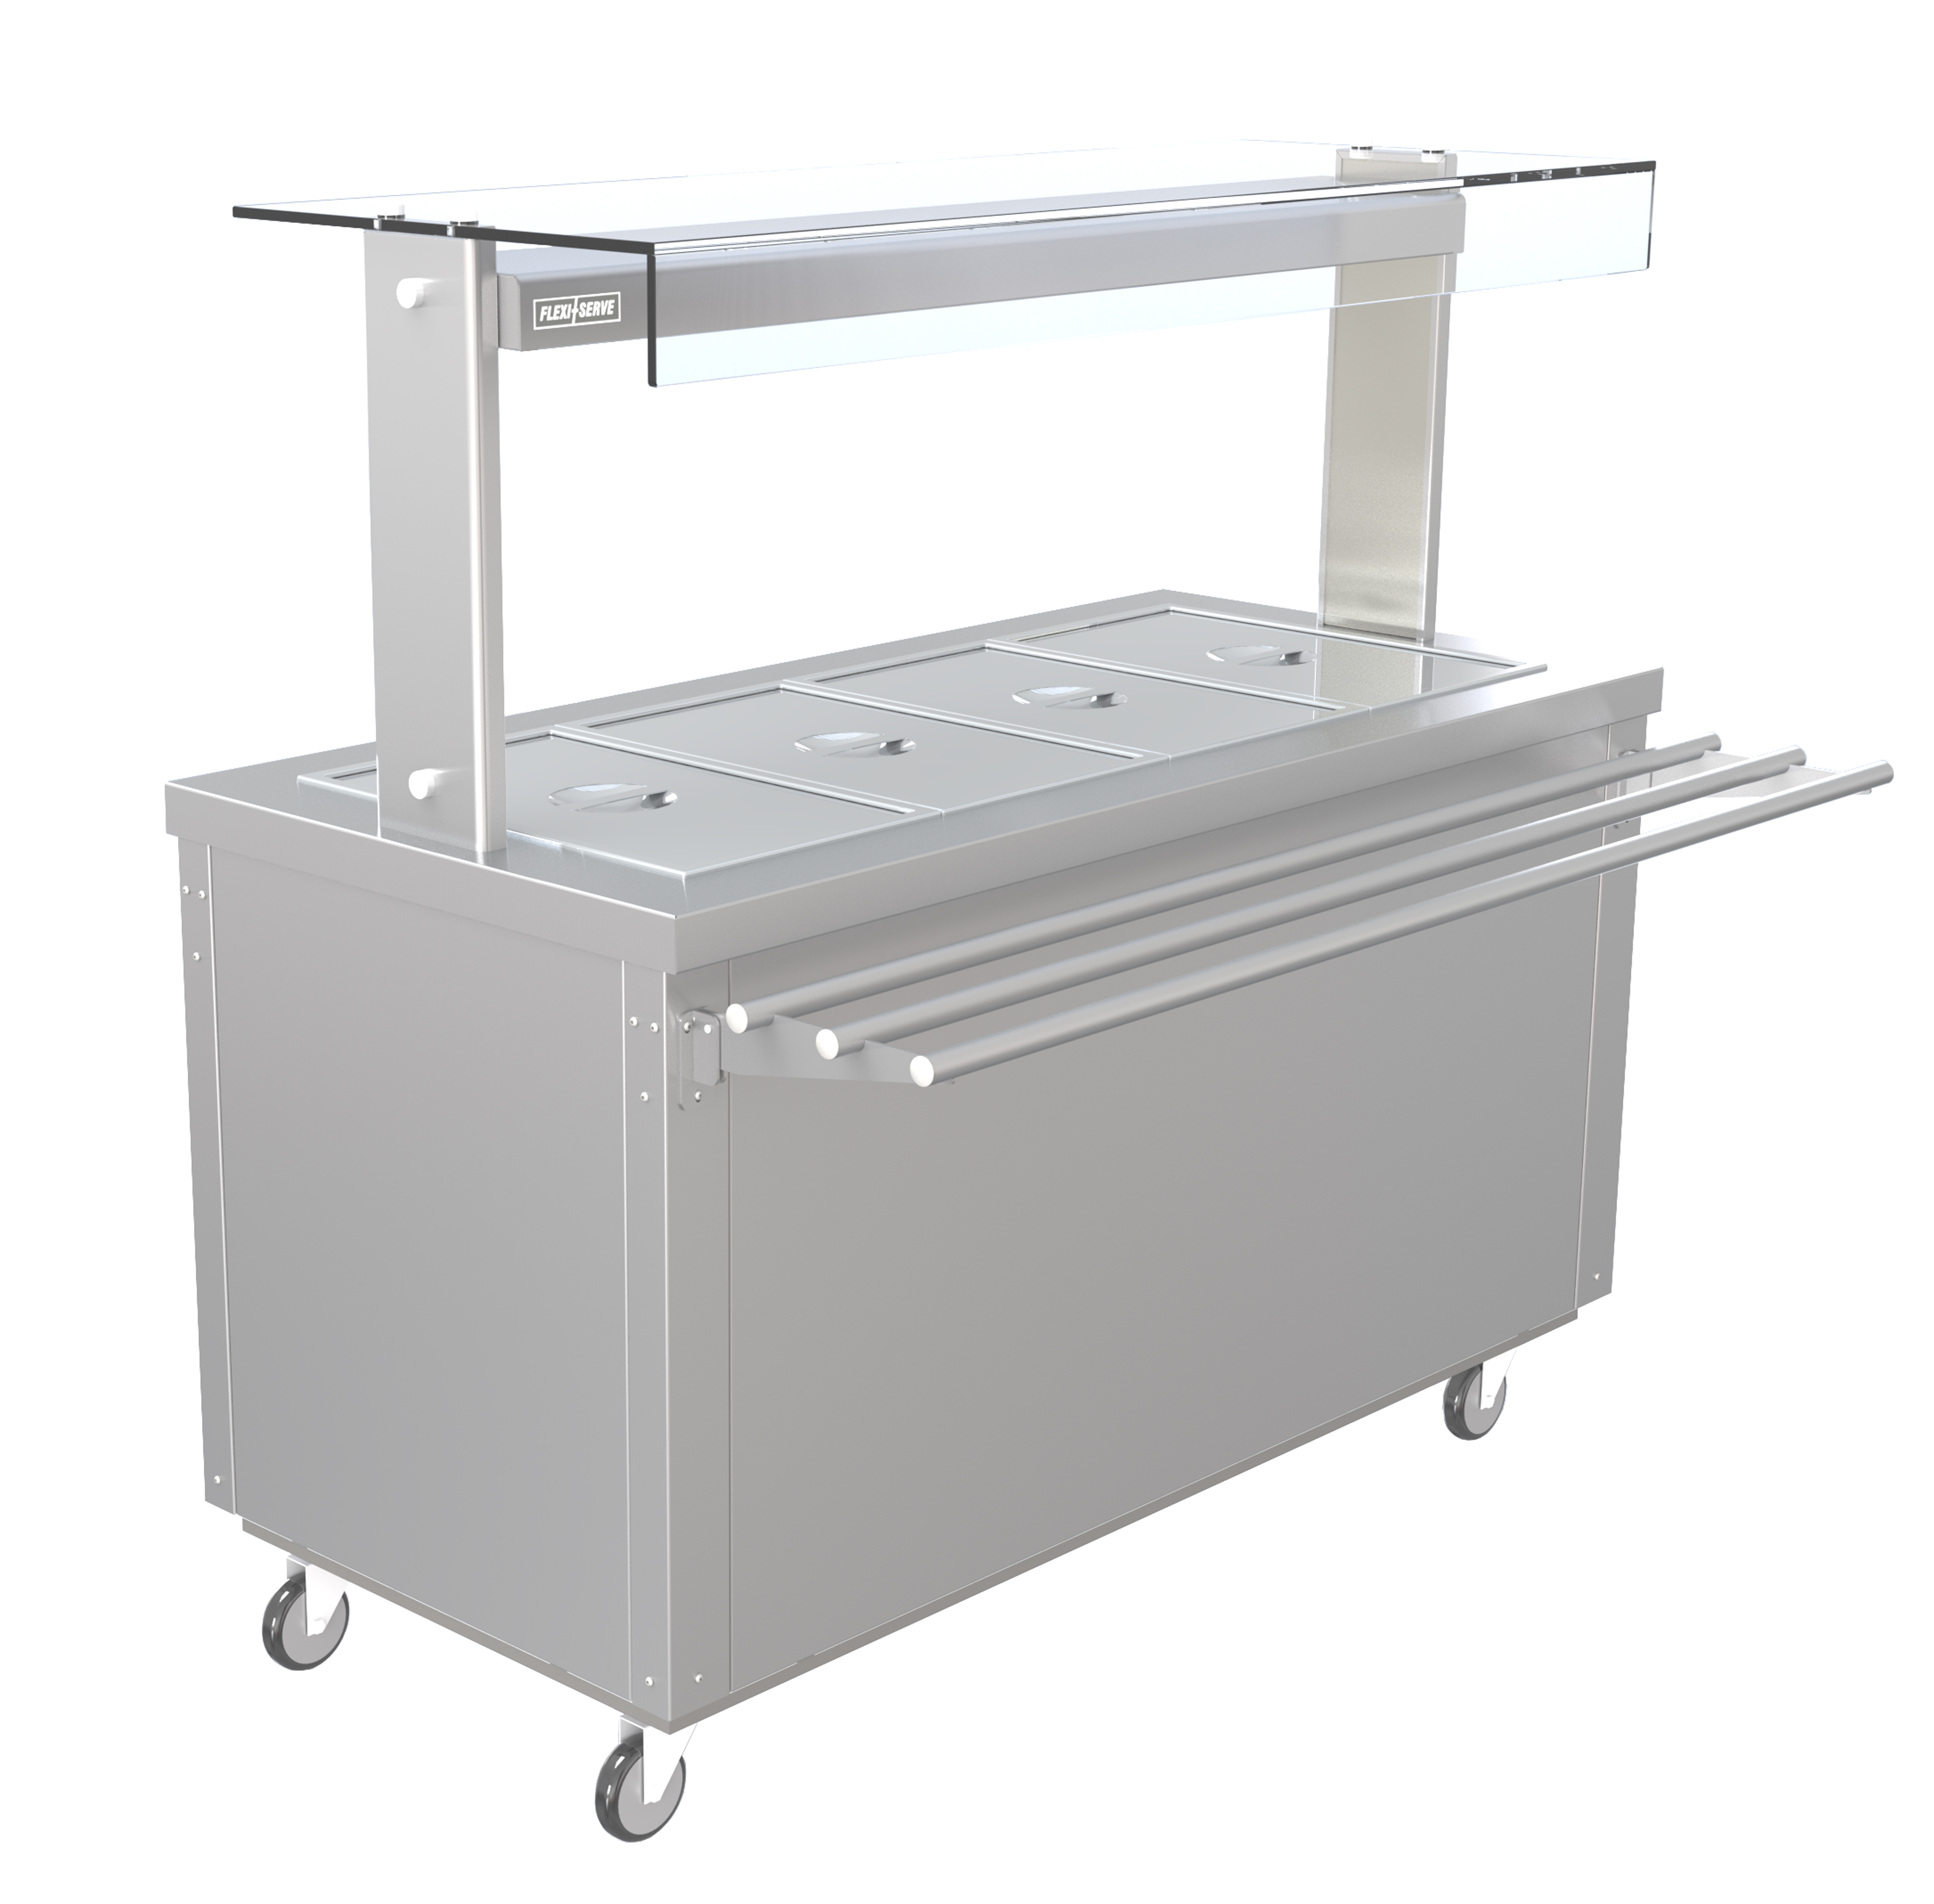 Parry FS-AW4 - Flexi Serve Ambient Cupboard with Chilled Well and LED Illuminated Gantry